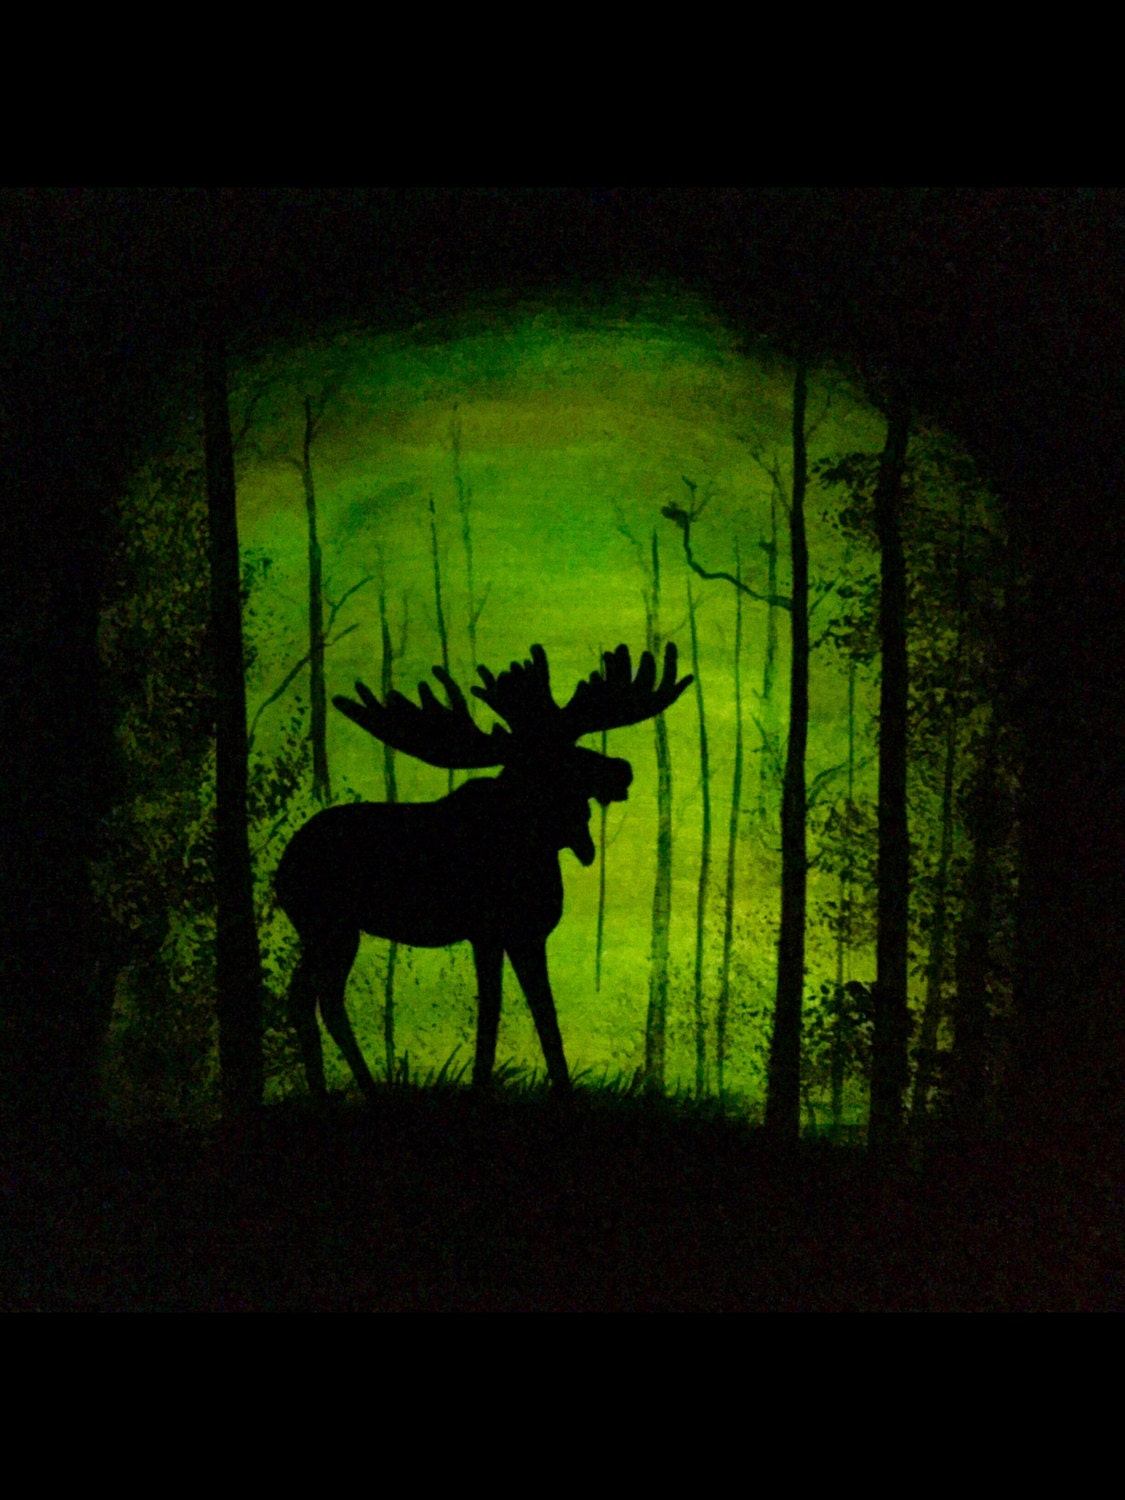 Deer, Print, Glow in the Dark Art, Forest Wall Art, Deer Decor, Glow in the  Dark, Nature Home Decor, Fantasy Gift, Gothic Decor, Blacklight 